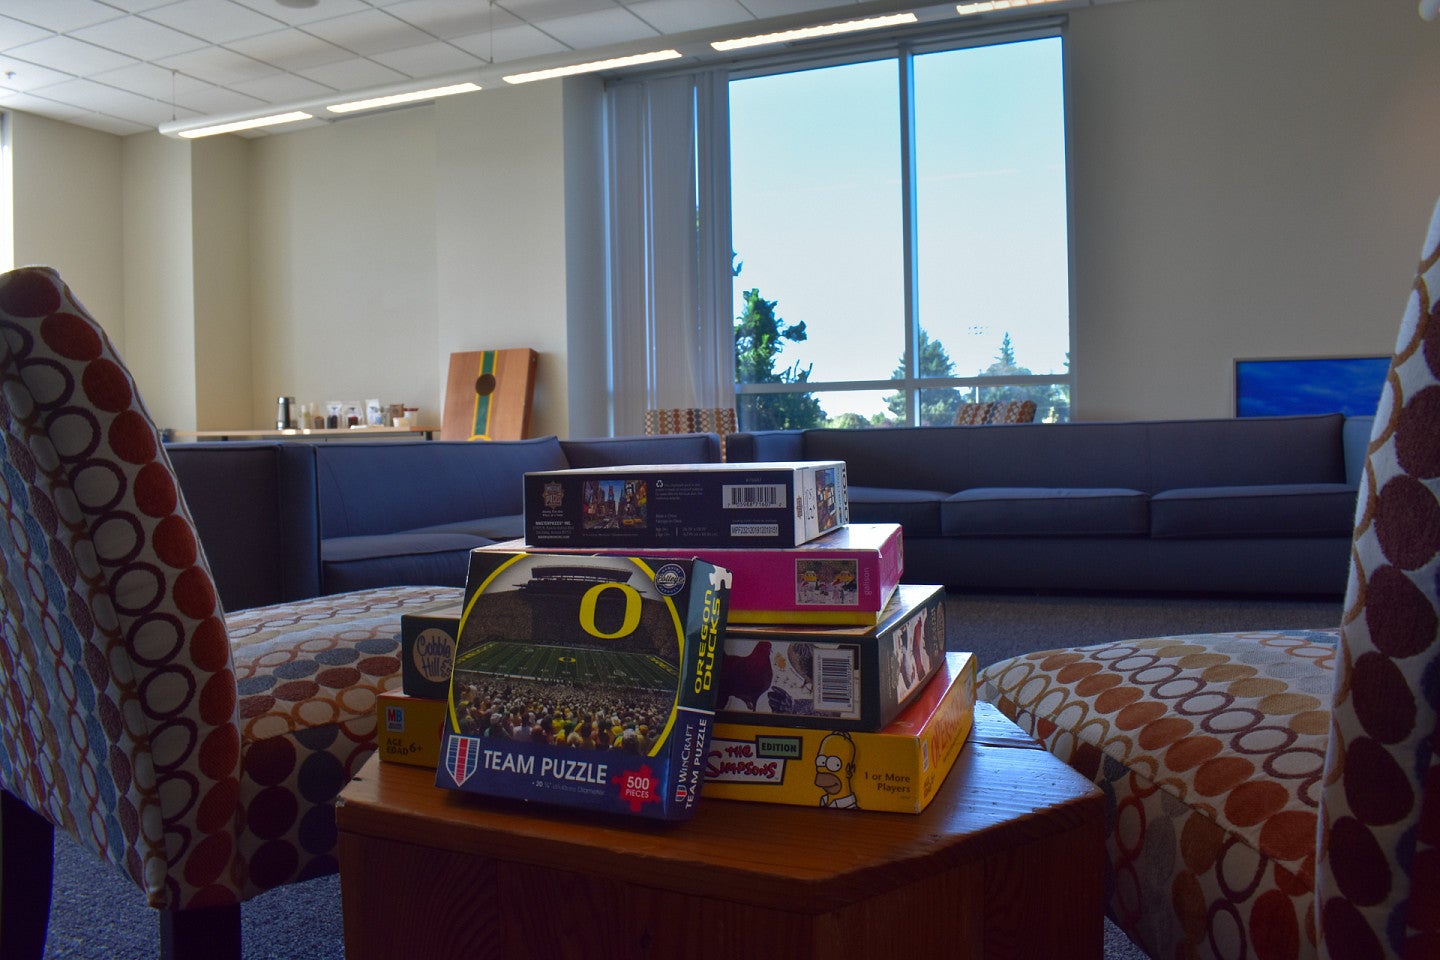 Board games and a UO Puzzle stacked on a table in The Duck Den